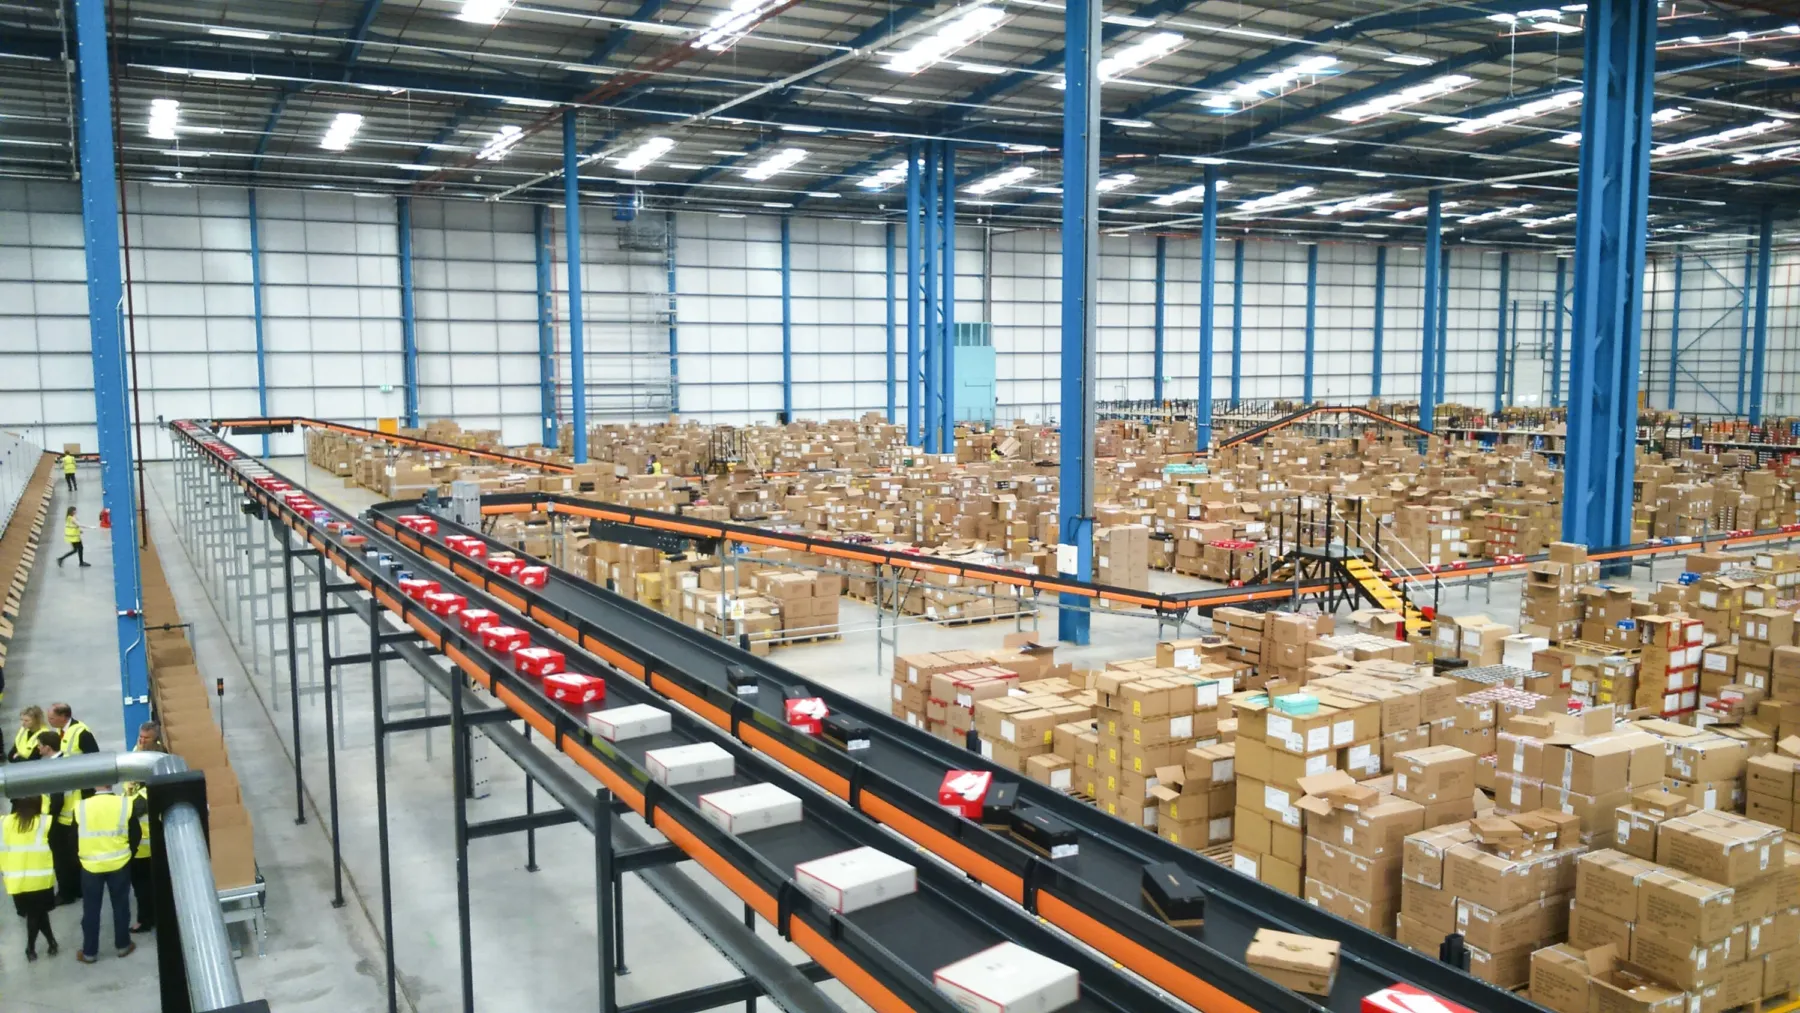 Inside the schuh distribution warehouse, a newly built facility. Conveyer belts at high level move boxes of shoes, with stock stacked in large boxes throughout the warehouse